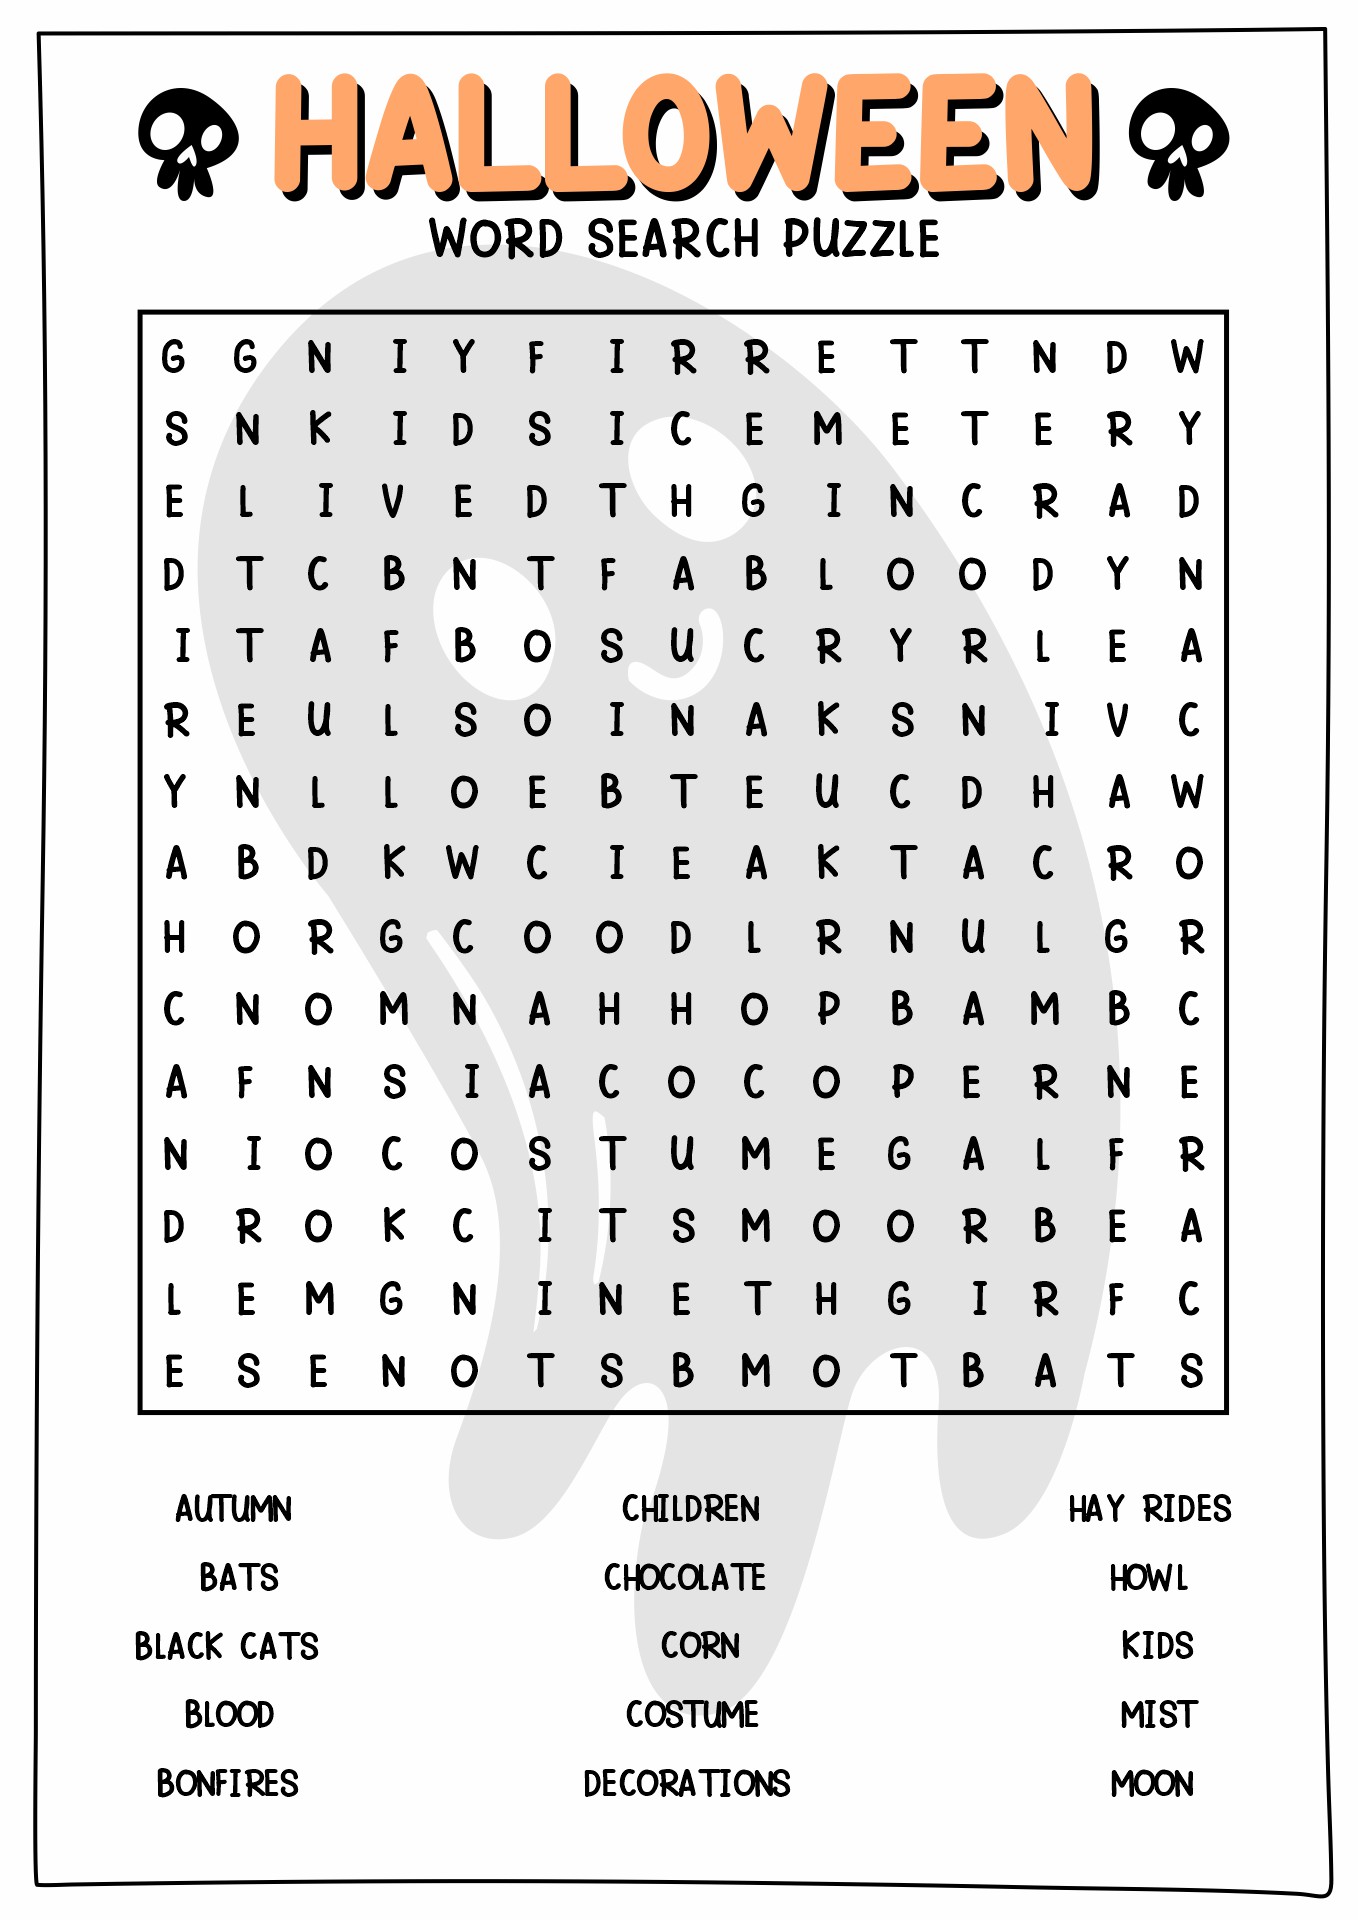 Free Halloween Word Search Puzzles Image